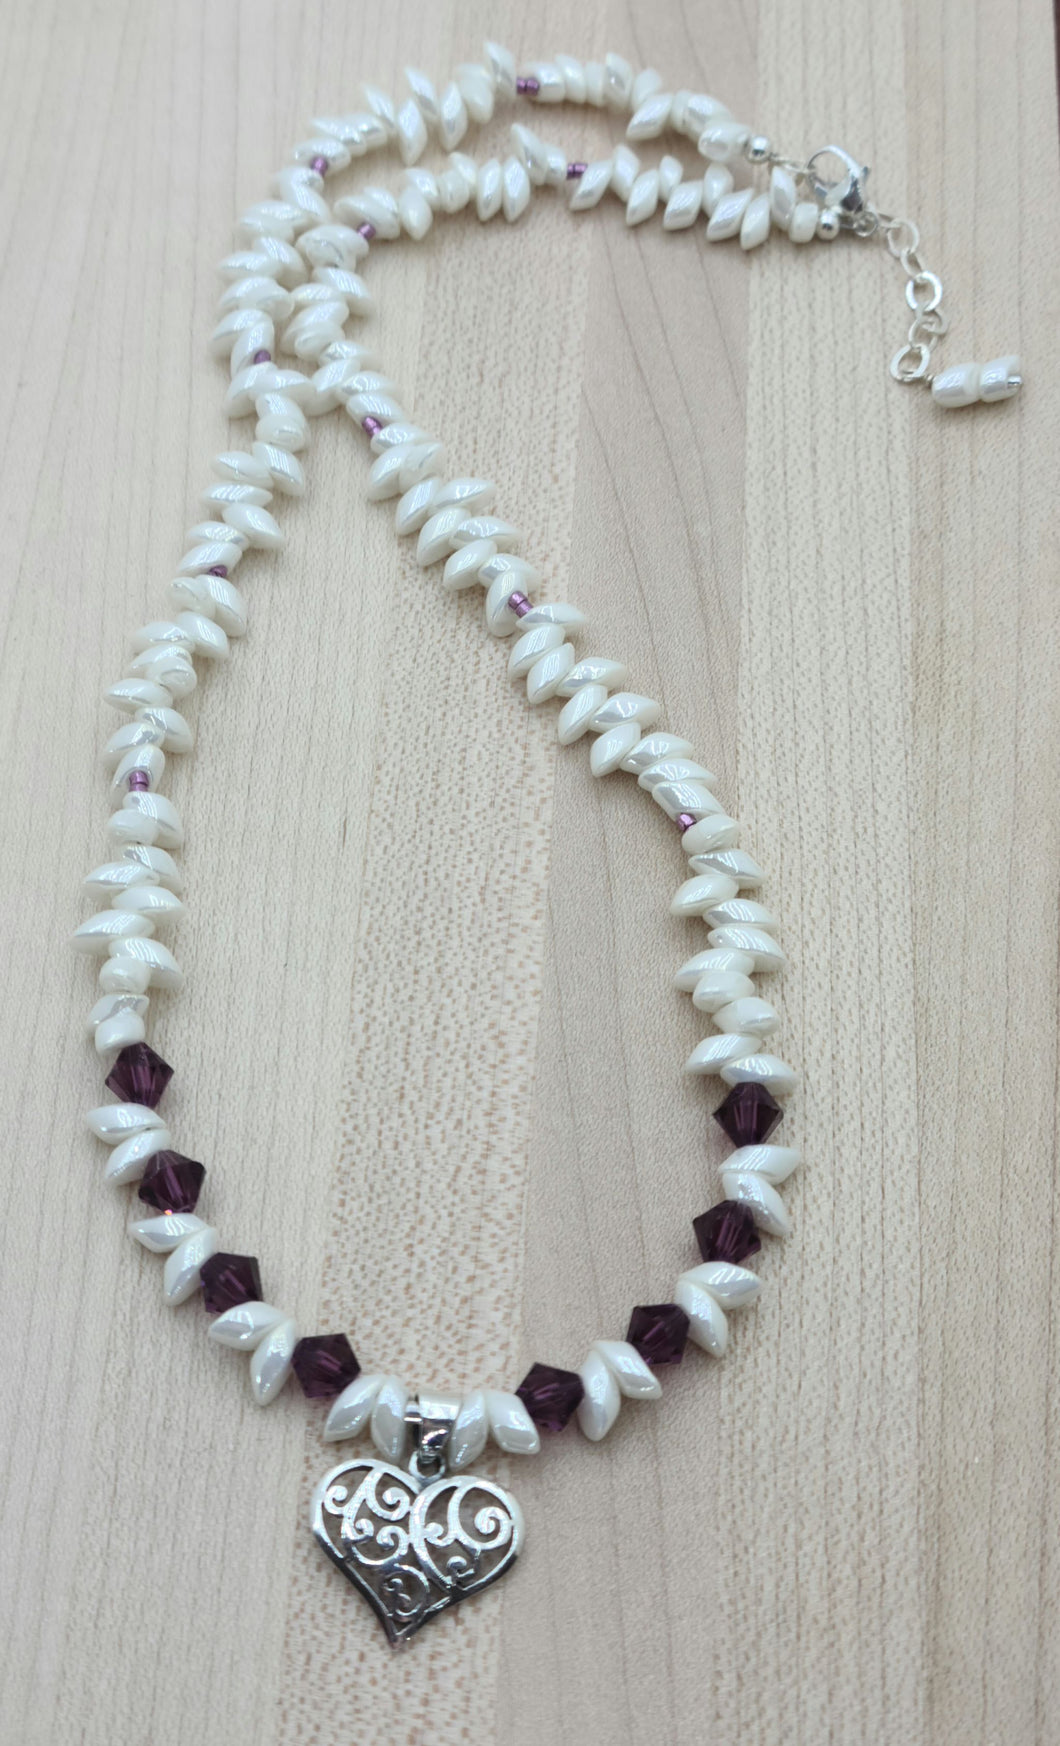 Ivory Magatama Beads & Amethyst Crystal Necklace with heart